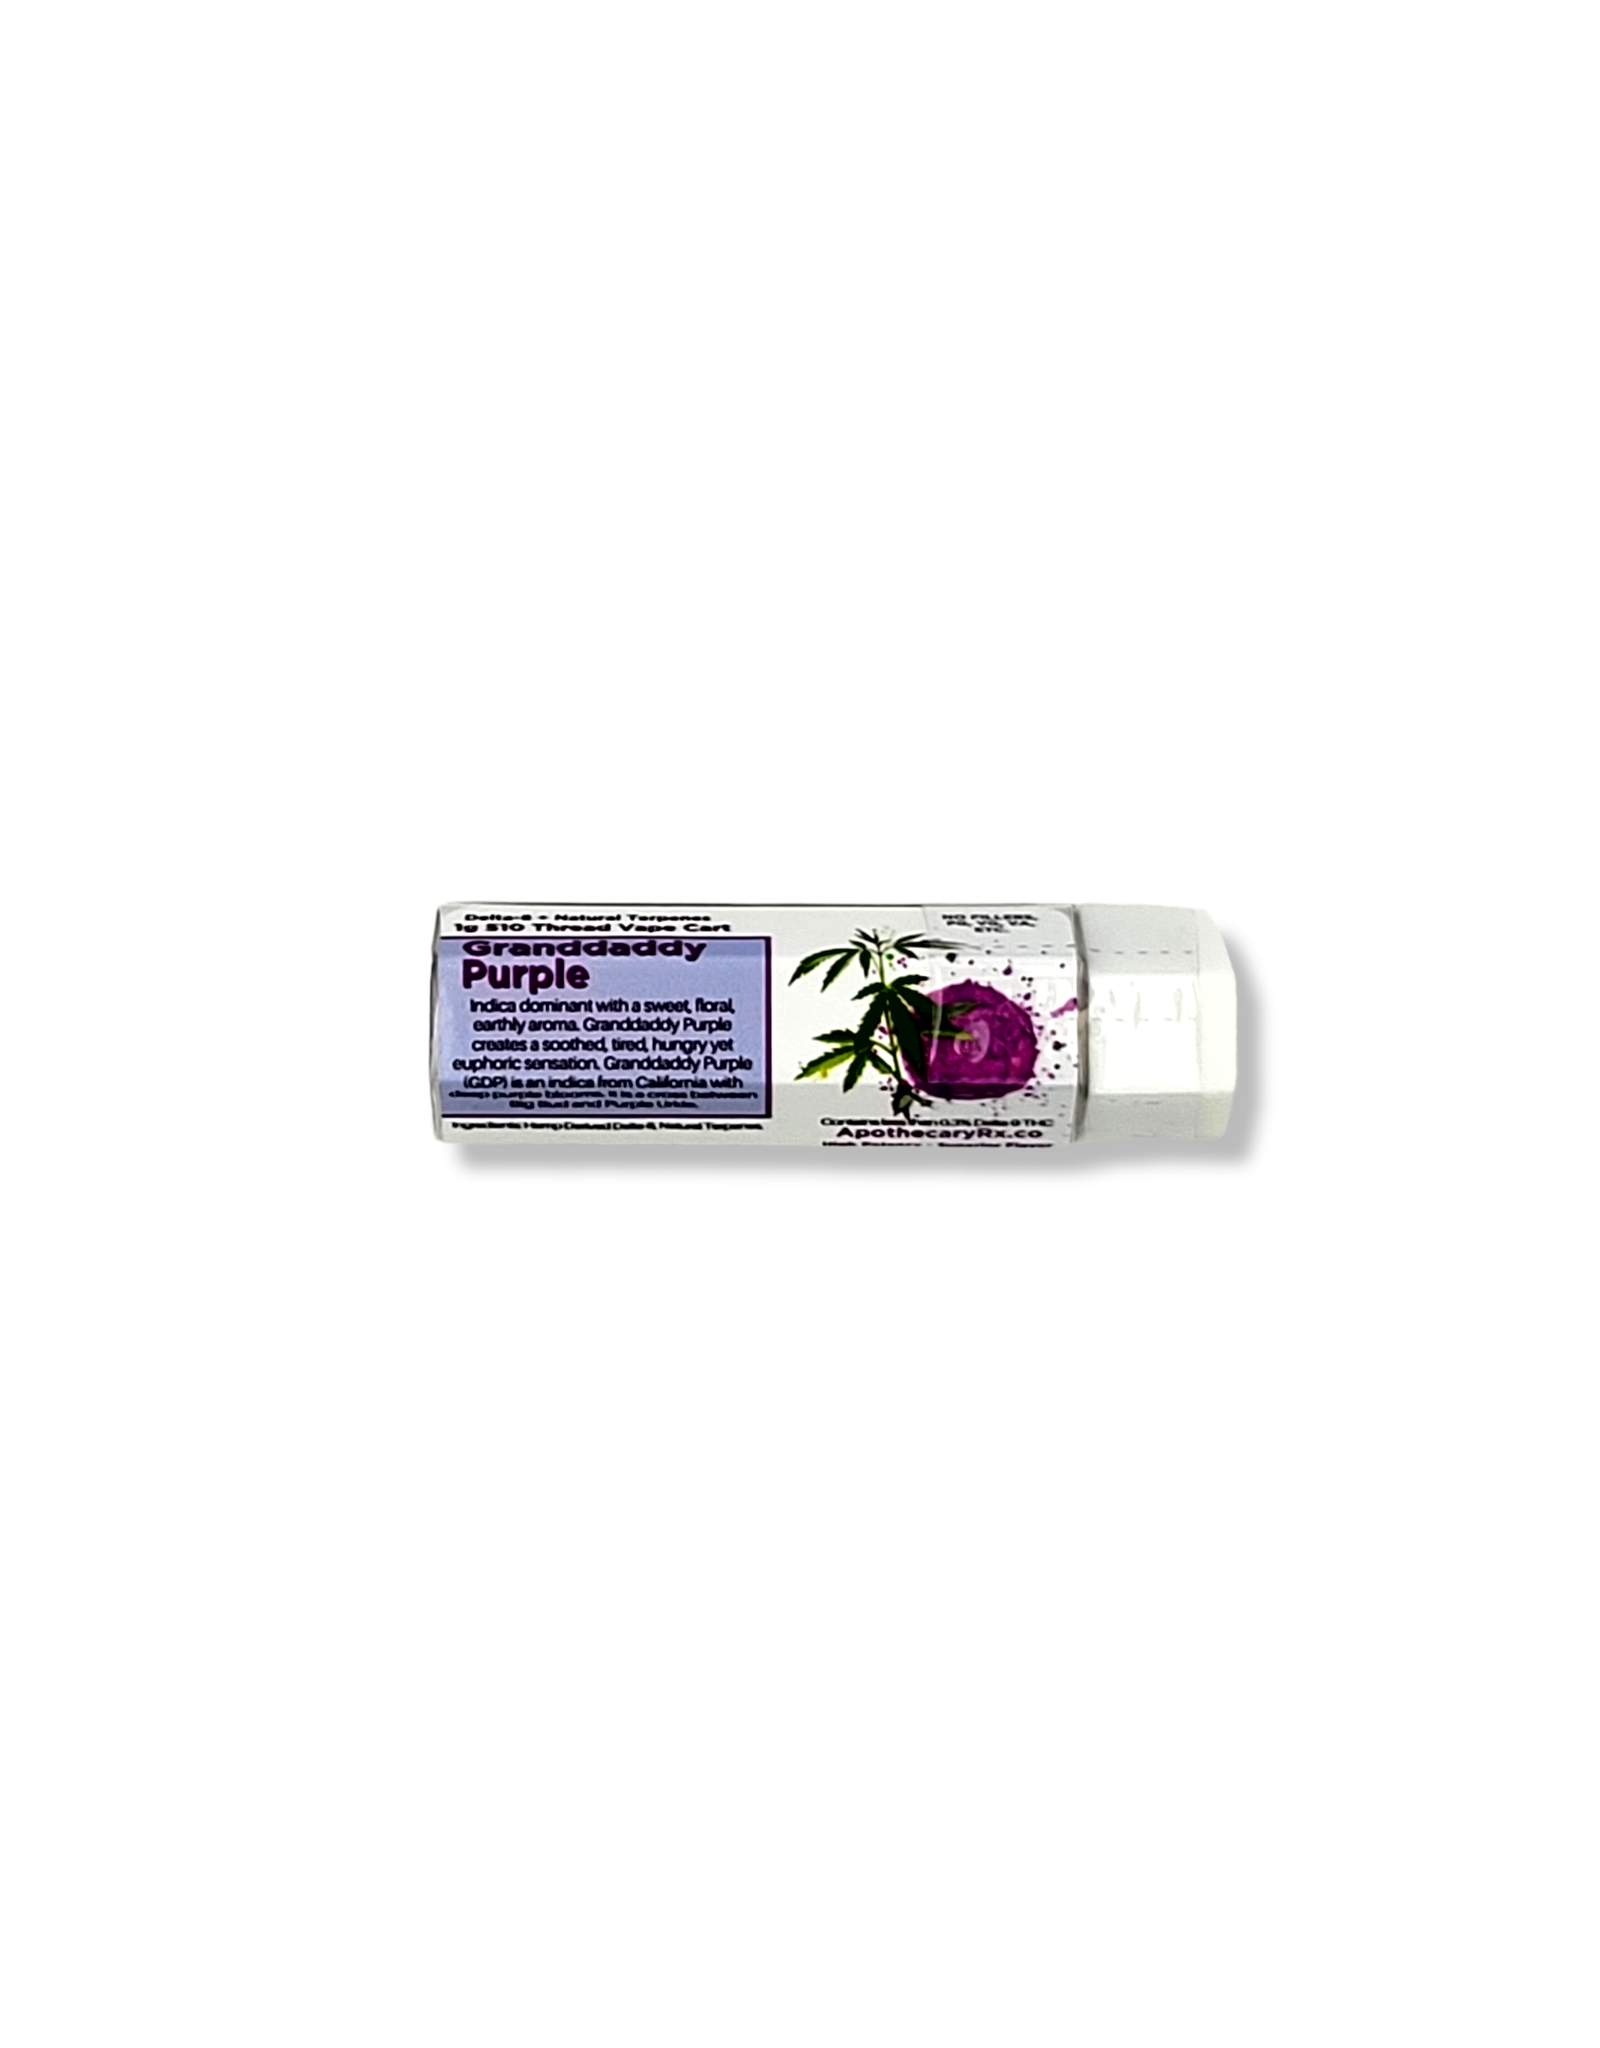 Apothecary Rx Apothecary Rx Delta 8 Granddaddy Purple Indica Cartridge 1gr